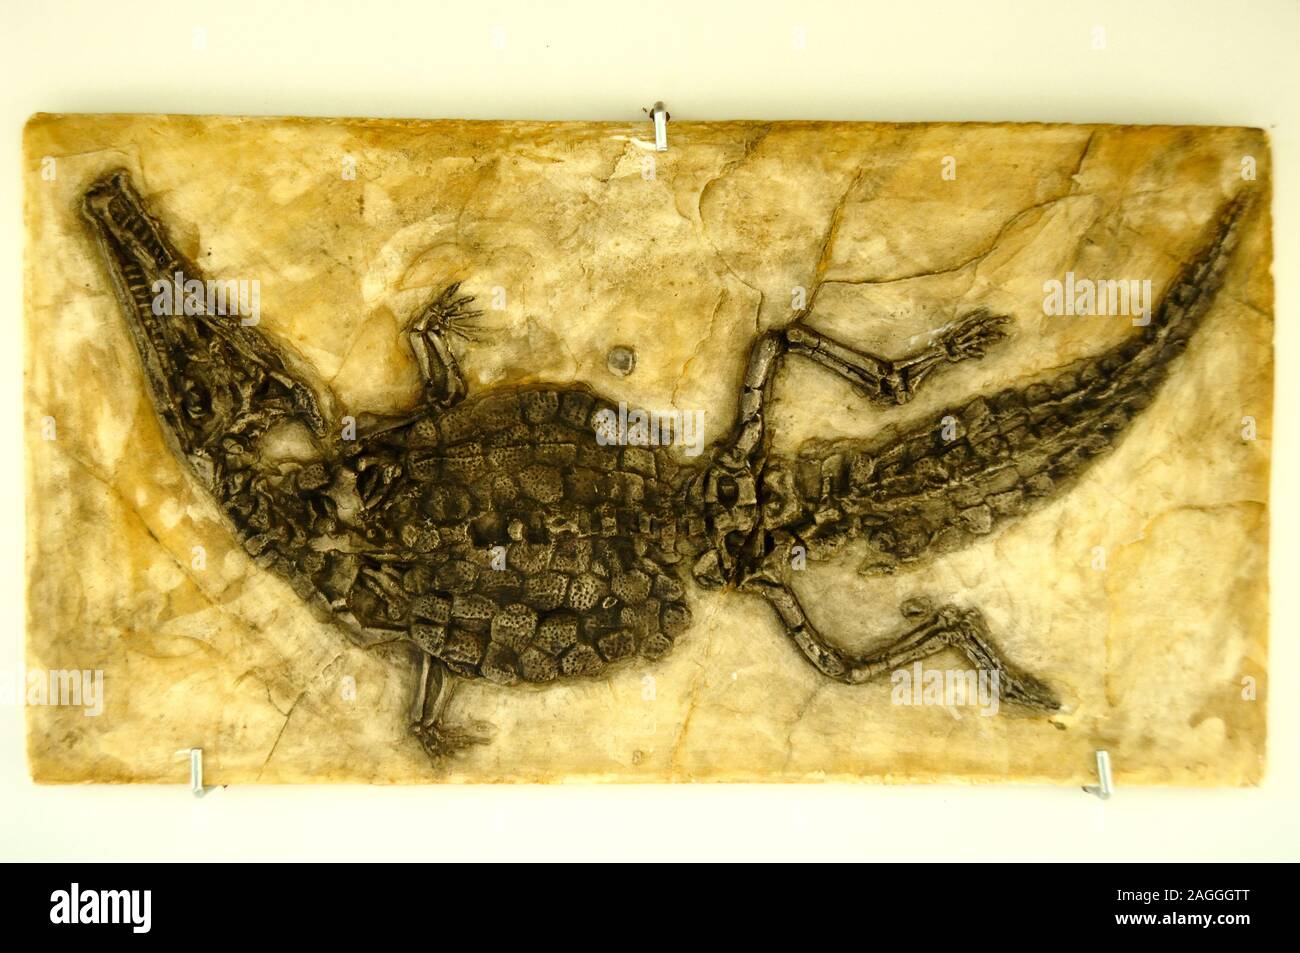 Fossil Crocodile, Crocodileimus robustius, 155.6-150.8 million years old, found mid-c19th in Lithographic Stone Quarry of Cerin, Bugey, Ain, France Stock Photo